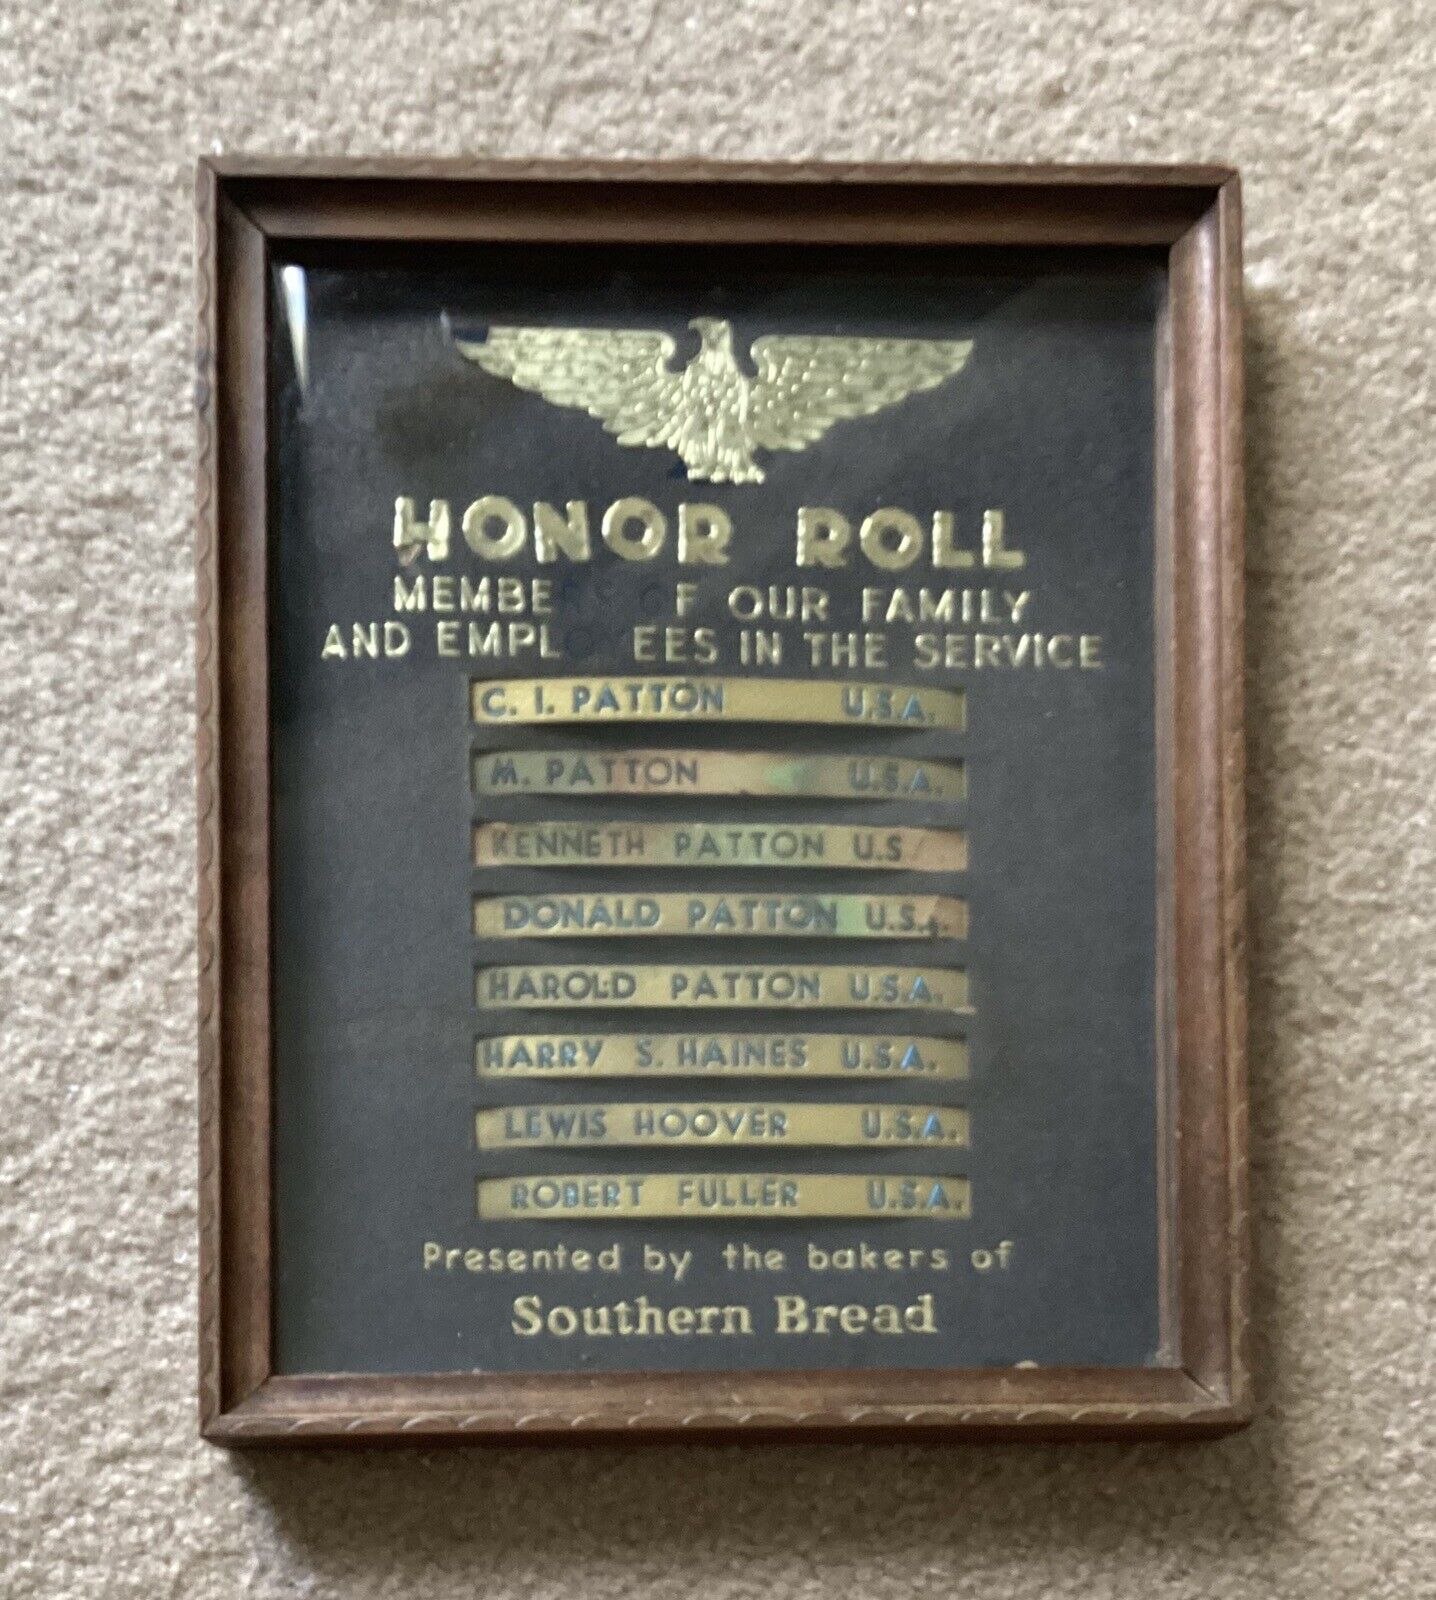 Honor Roll List Of Employees Presented By The Bakers Of Southern Bread Company